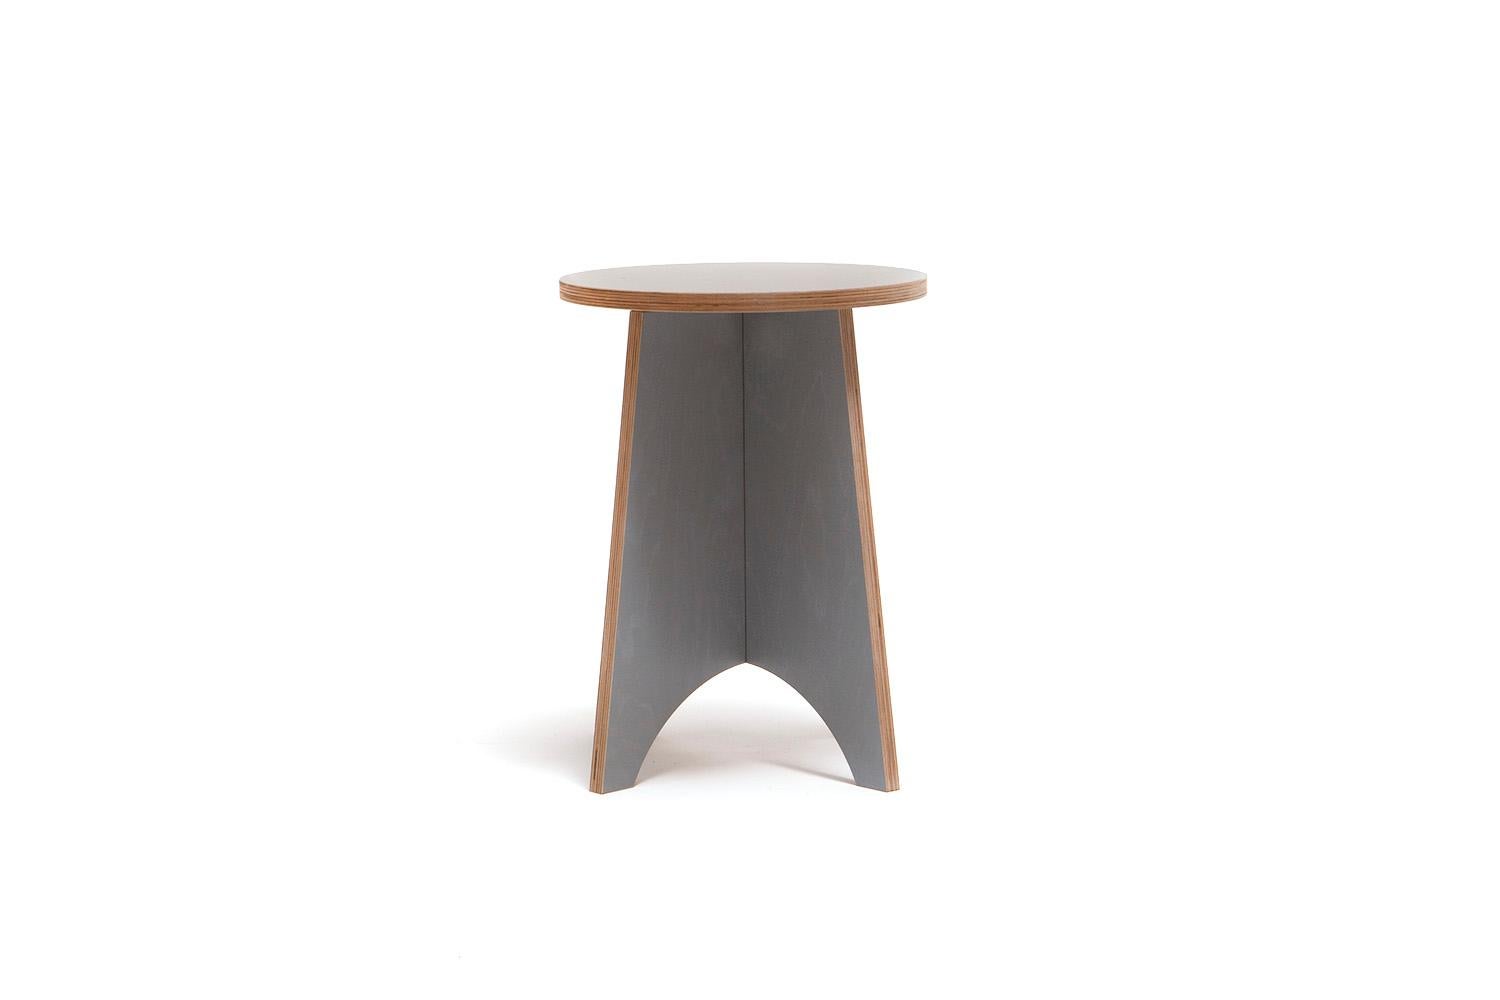 Modern Zero-Waste Plywood Upstate New York-Made Side Table or Stool